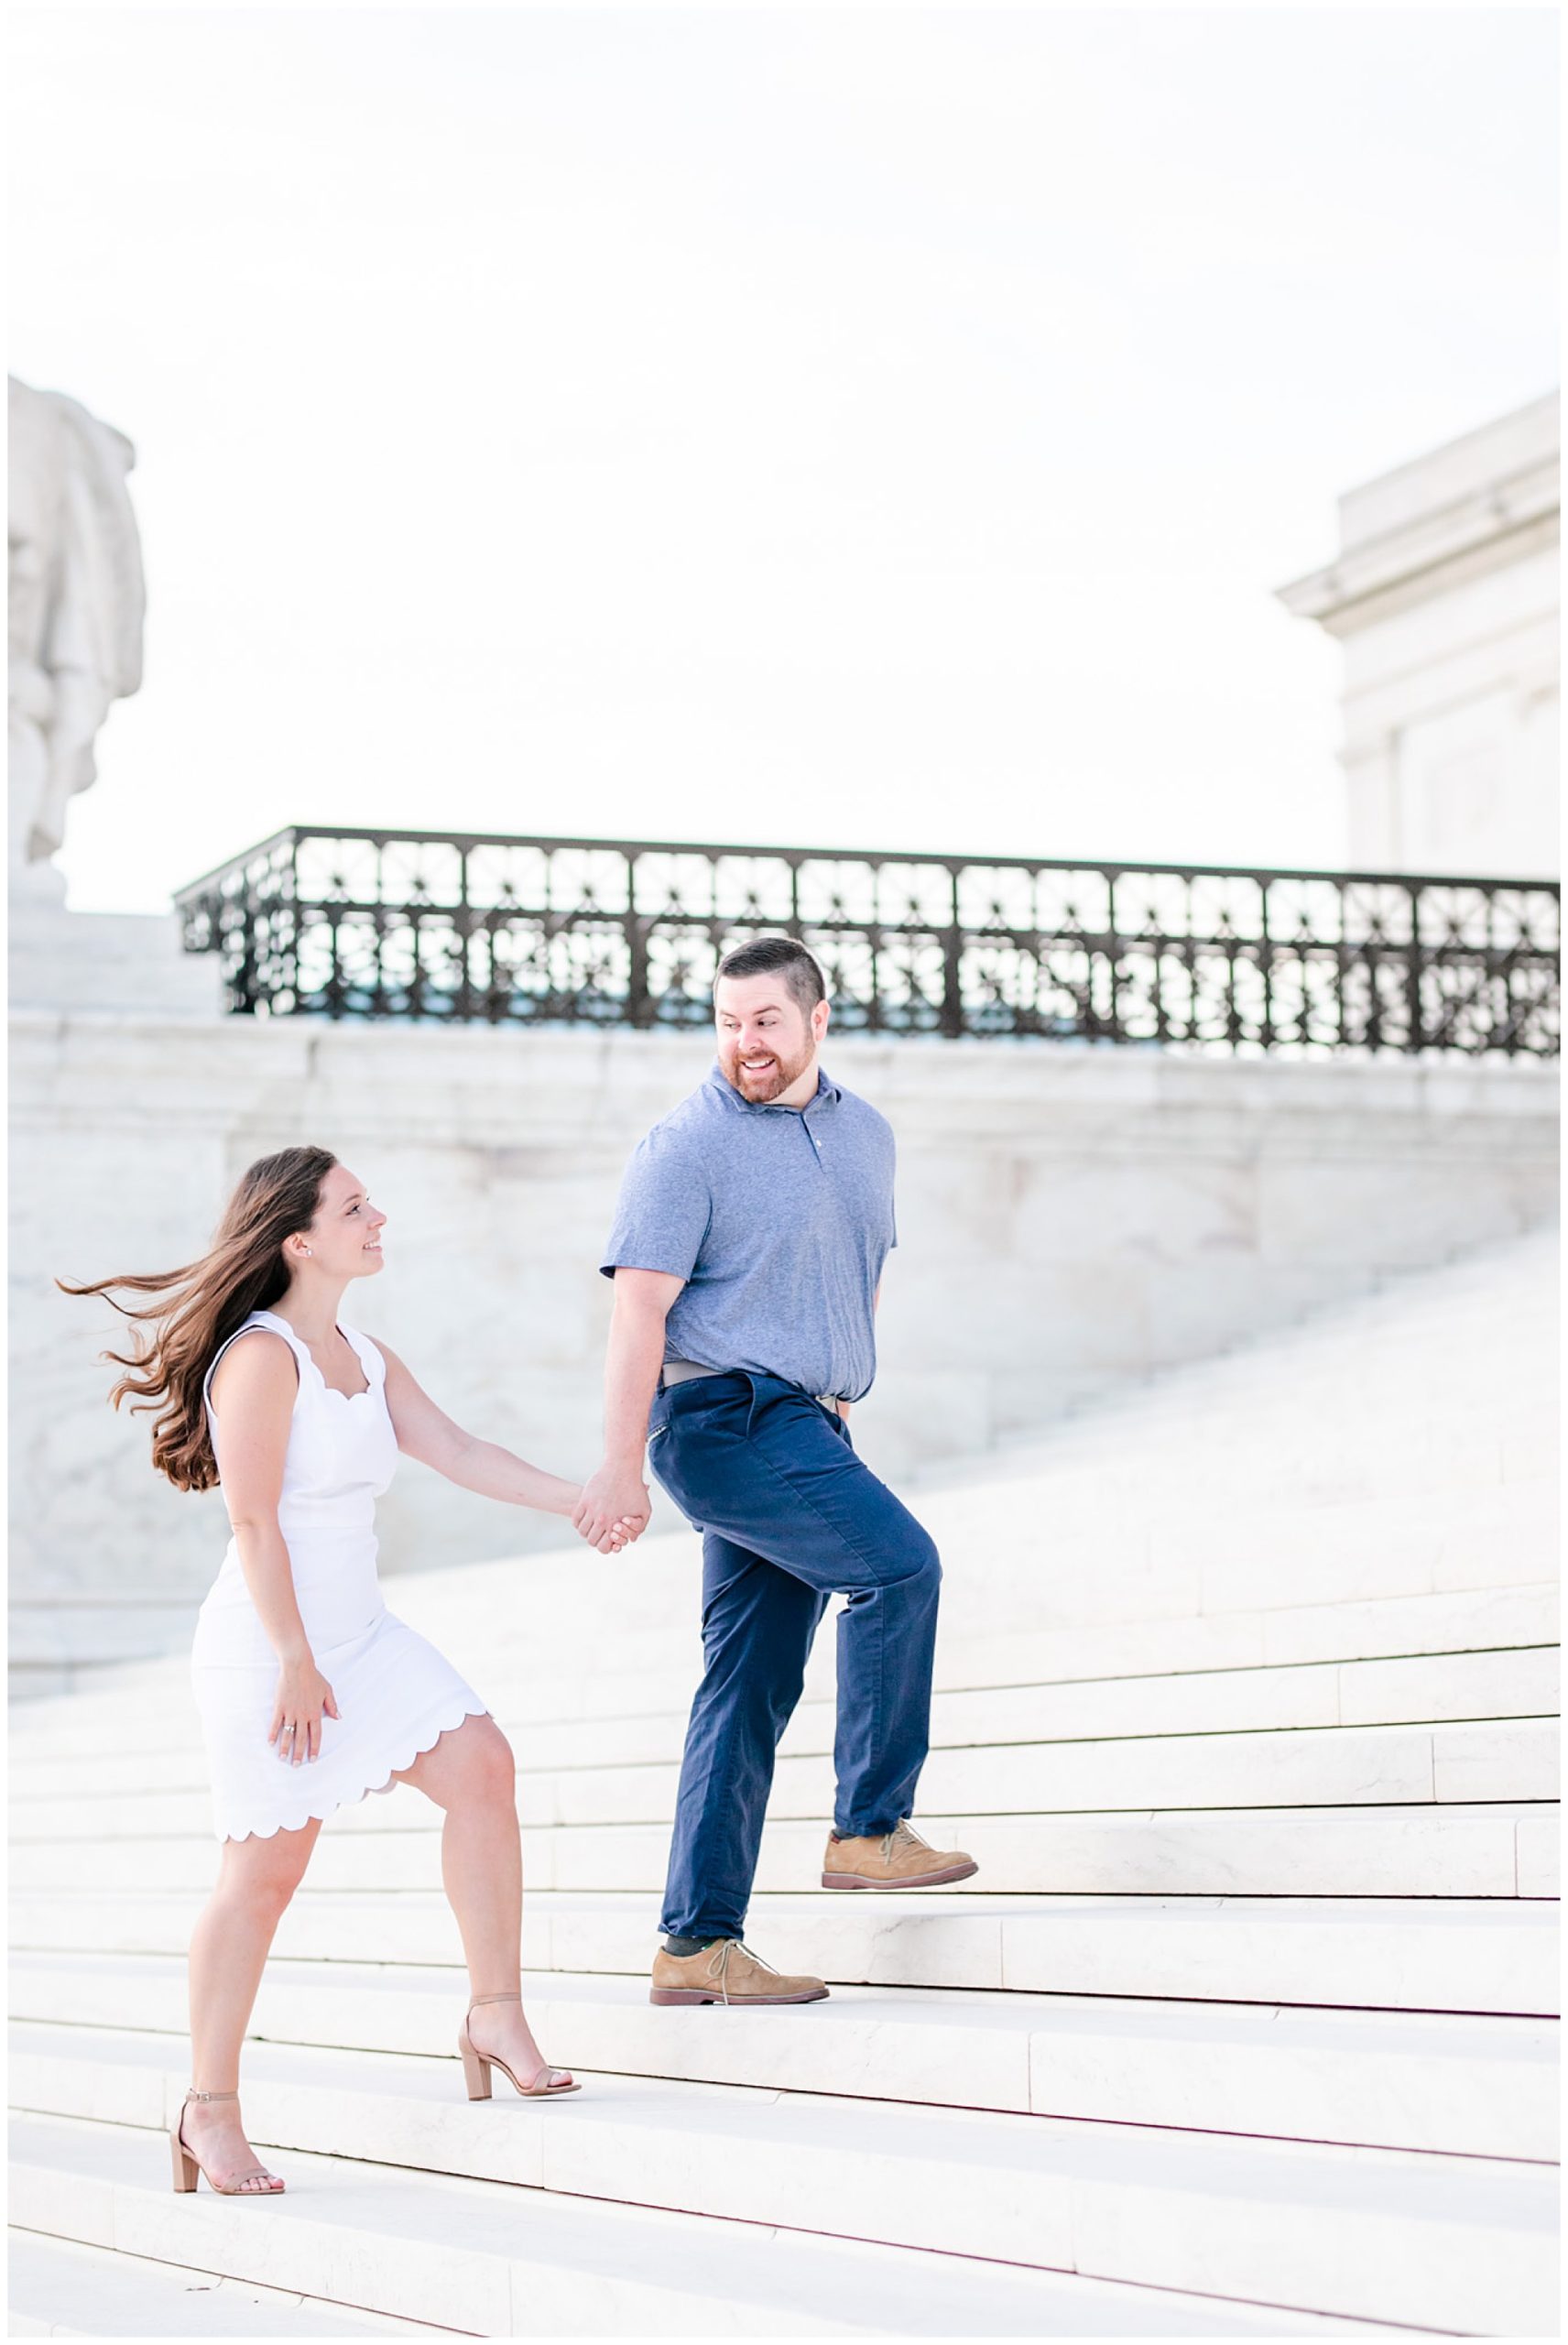 Capitol Hill engagement session, Capitol Hill portraits, D.C. engagement photography, D.C. engagement photographer, D.C. Capitol Hill D.C., DC photography, engagement photography, Rachel E.H. Photography, classic engagement photos, spring engagement photos, couple walking up stairs